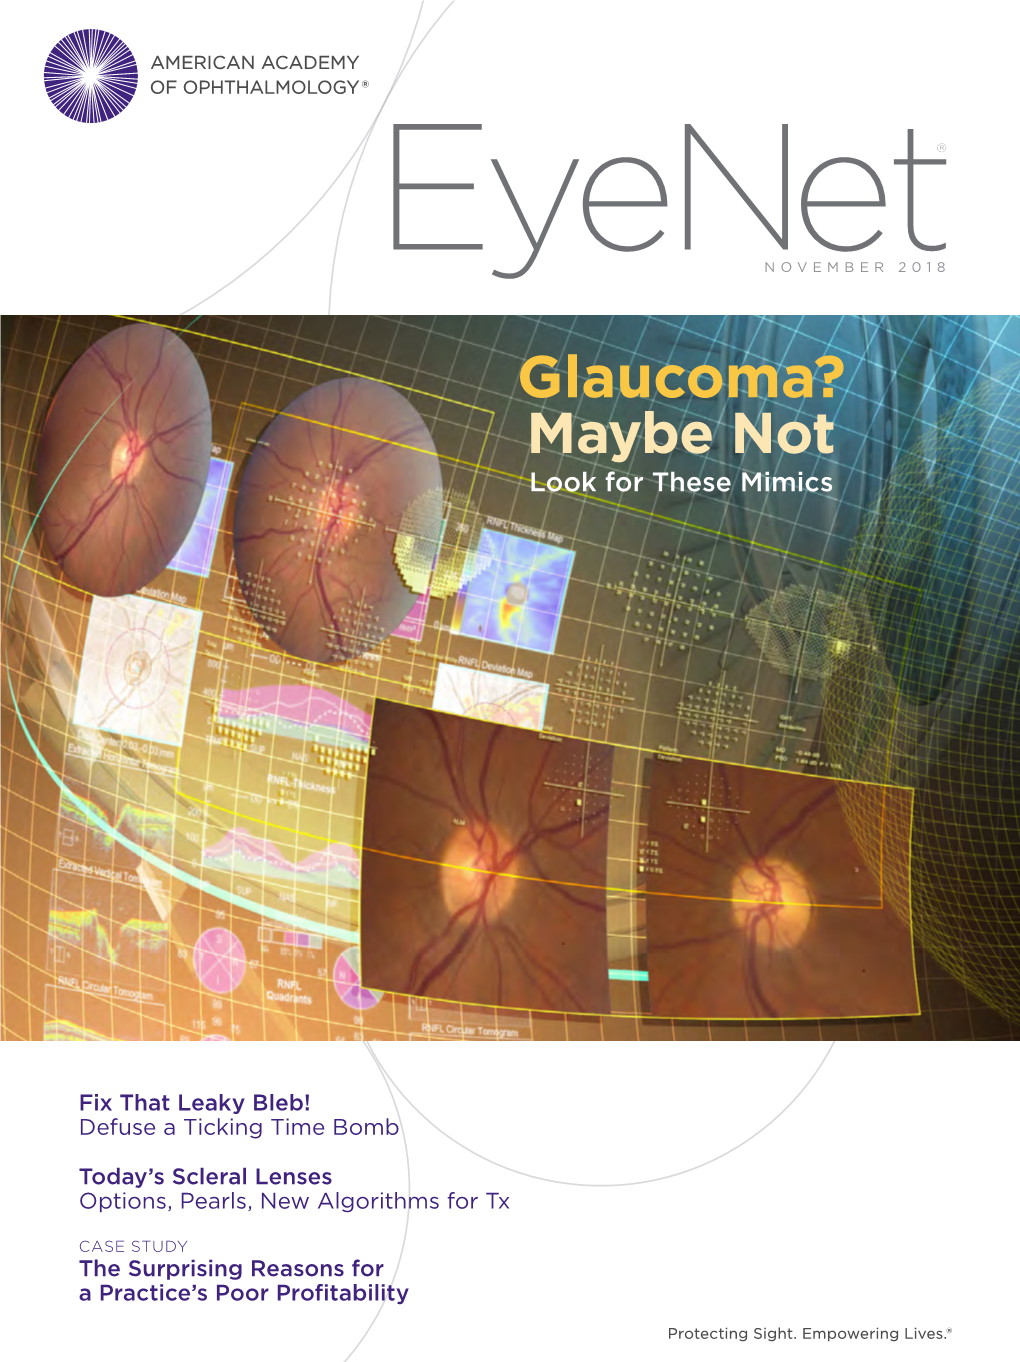 Glaucoma? Maybe Not Look for These Mimics